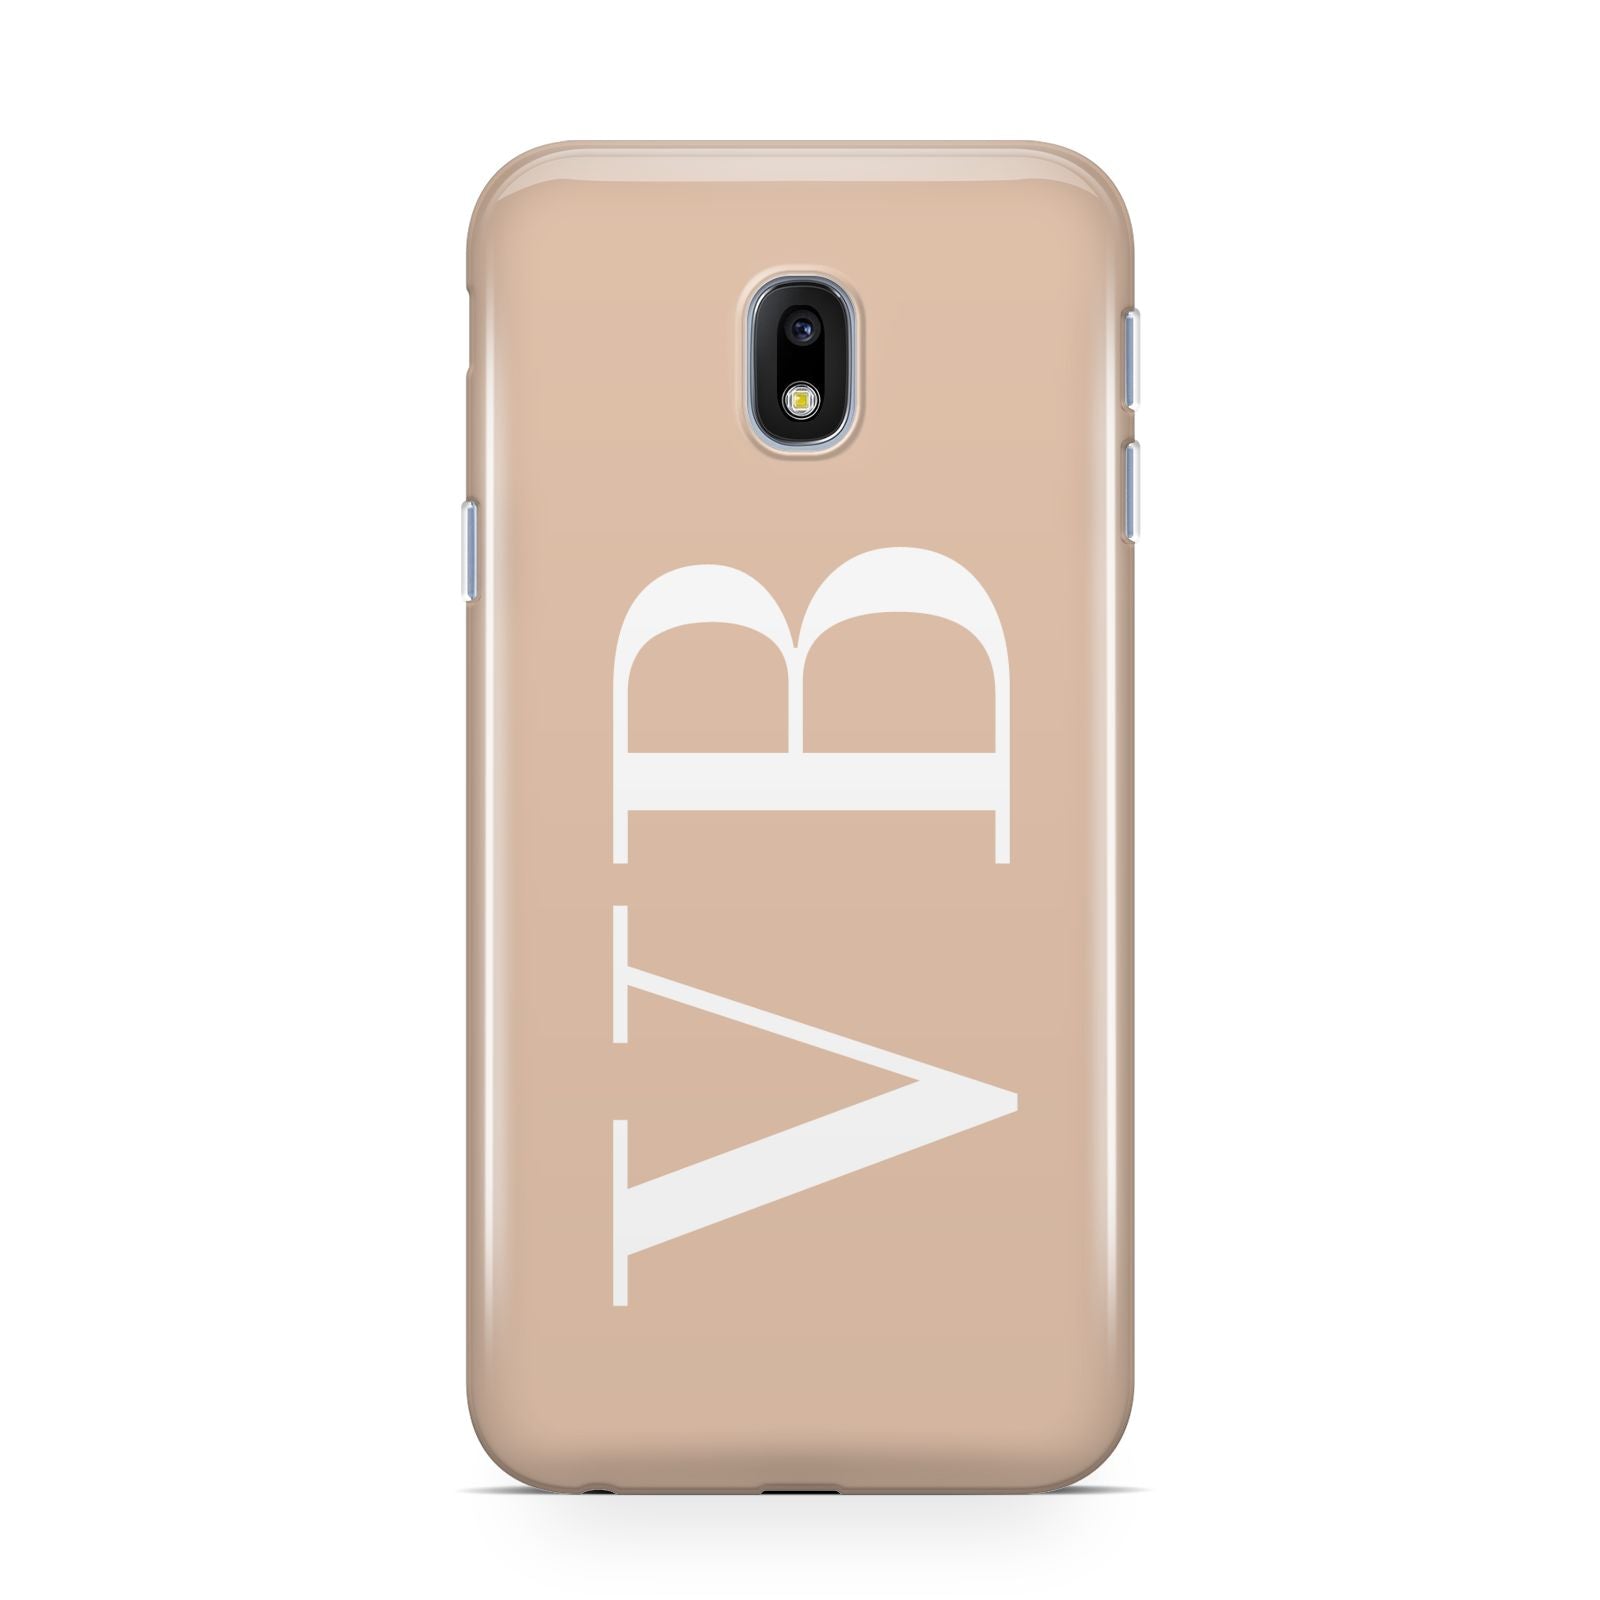 Nude And White Personalised Samsung Galaxy J3 2017 Case